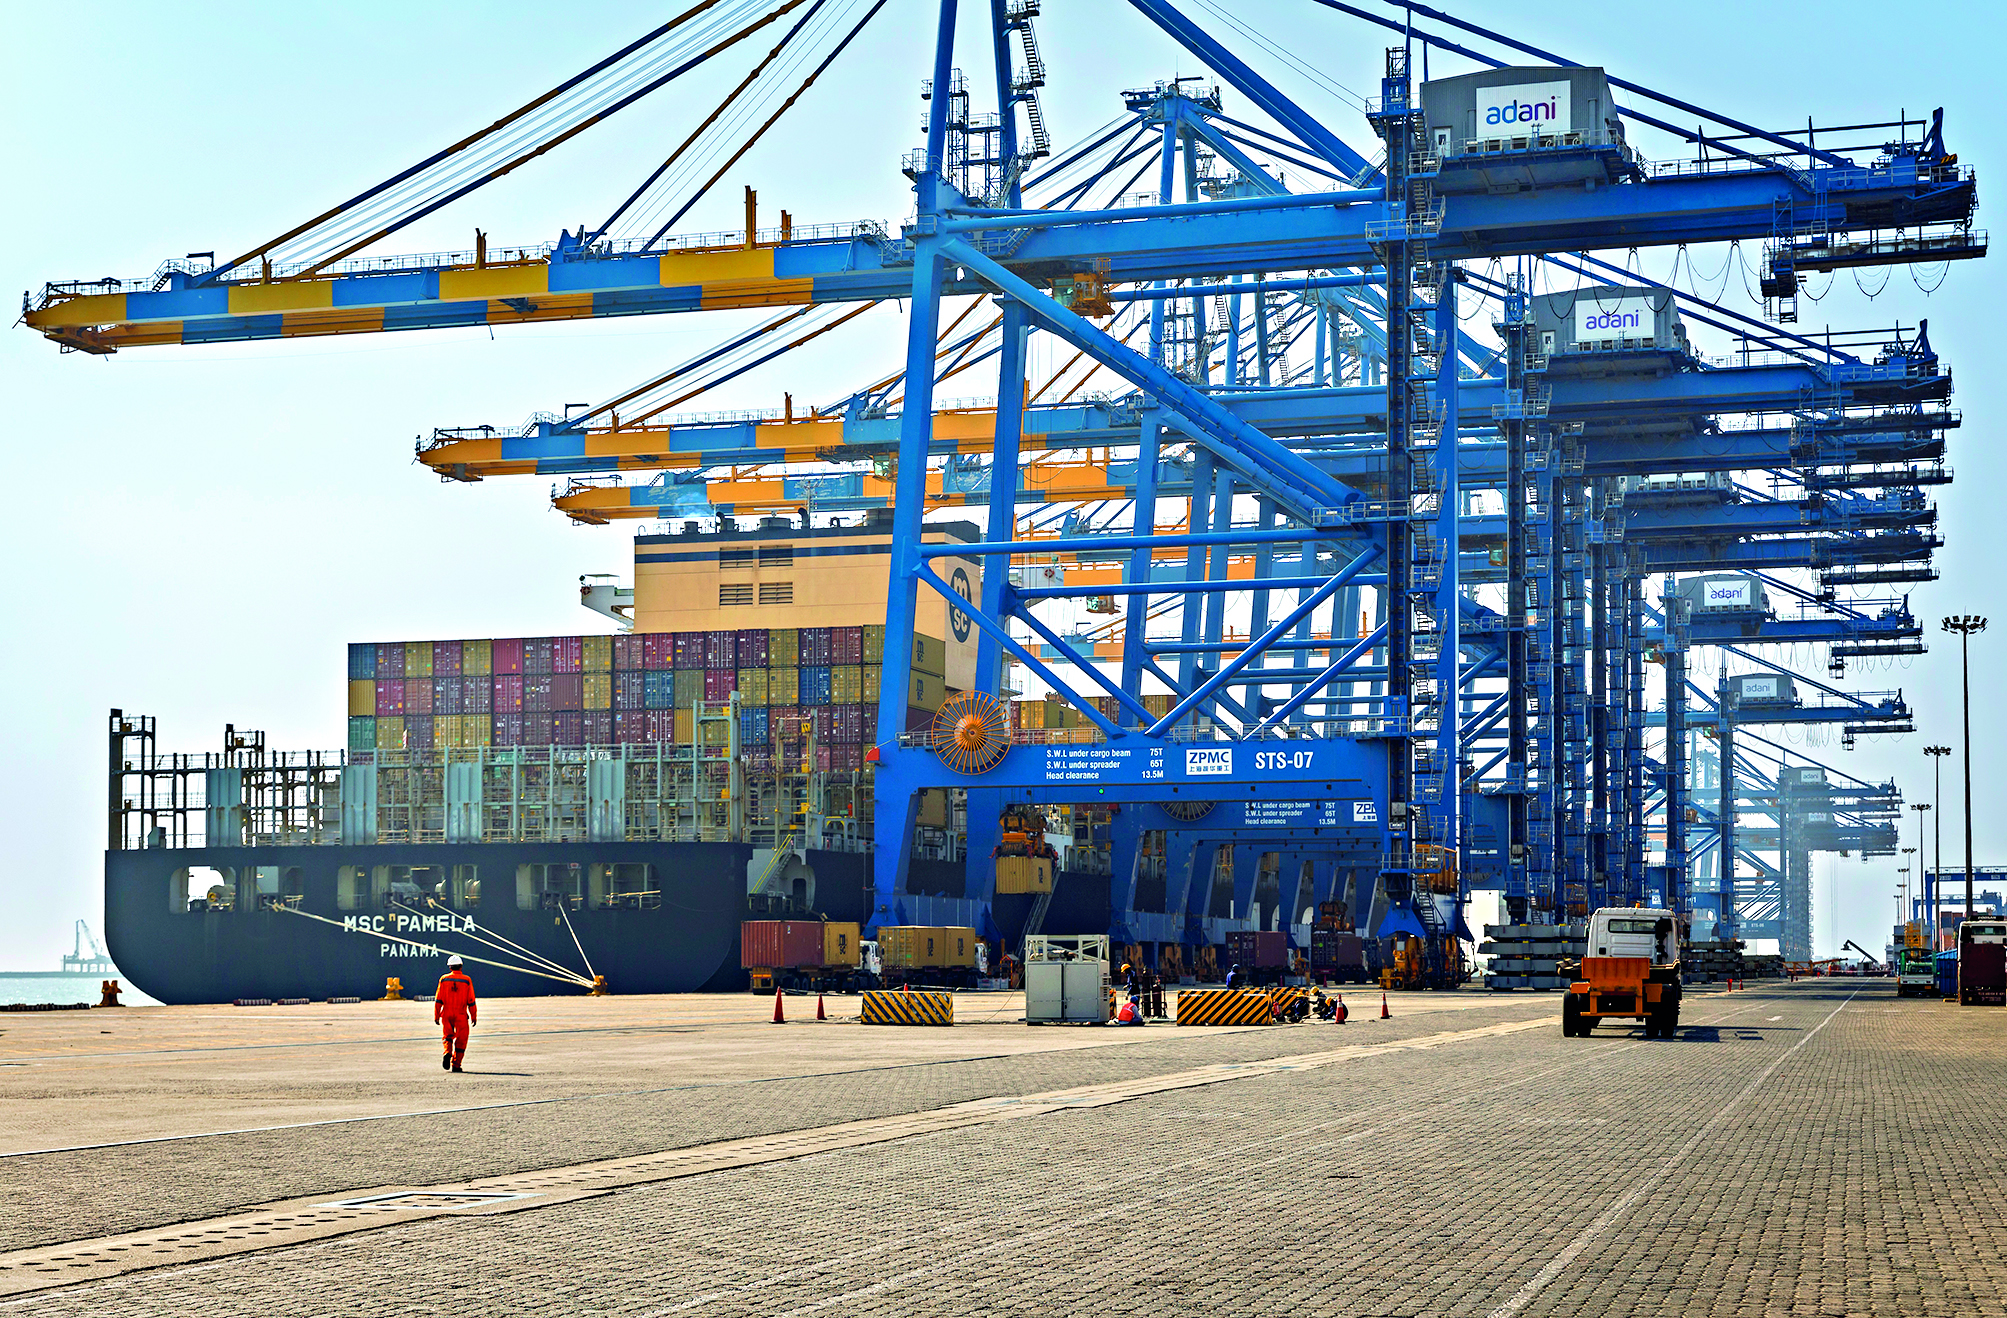 Adani Ports to acquire 95% stake in Gopalpur Ports for `1,349 cr